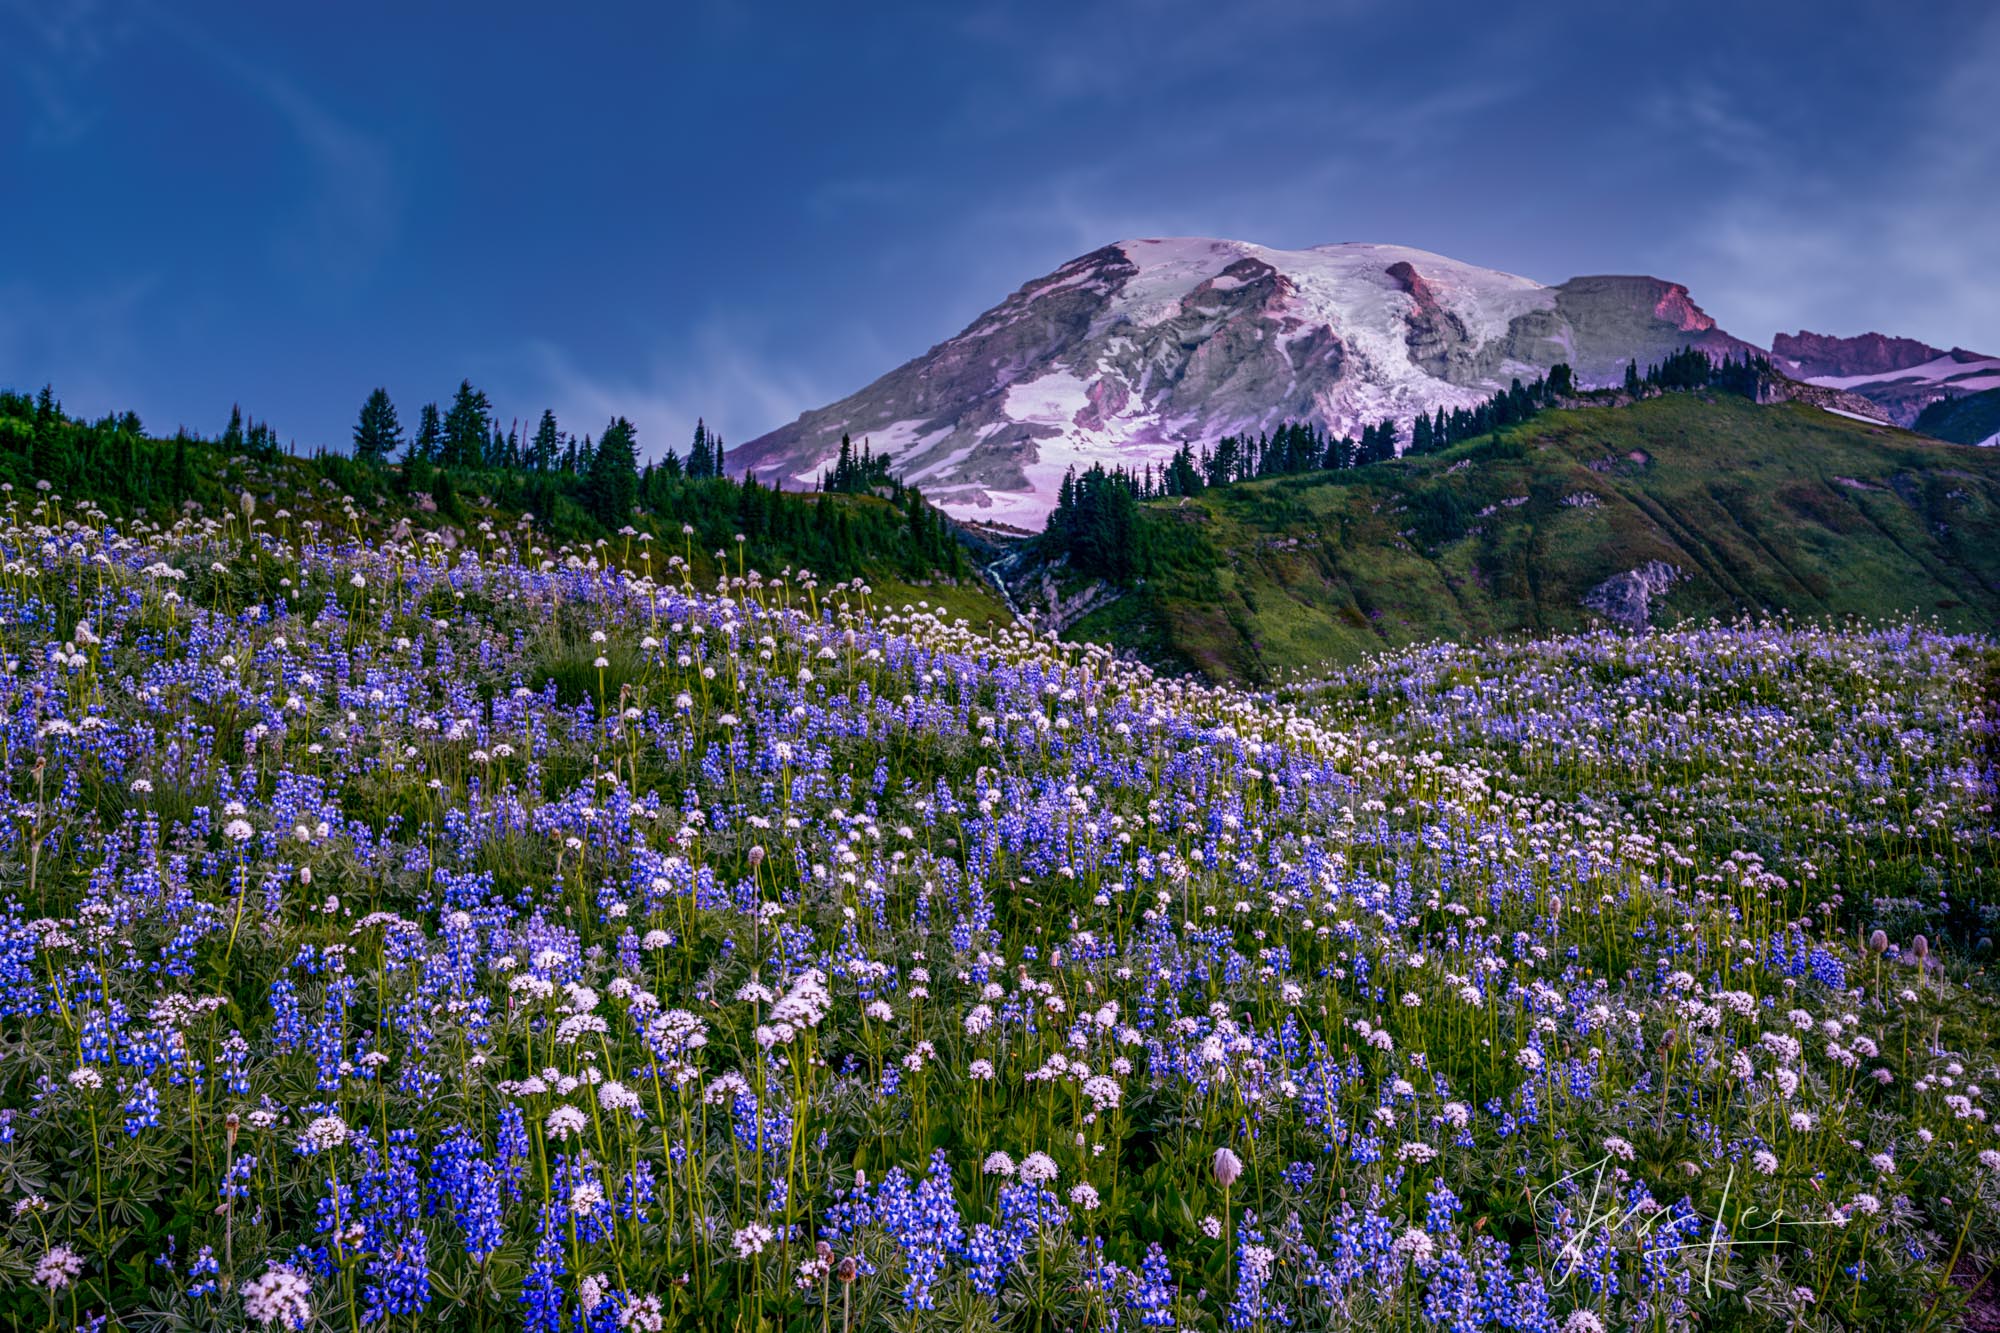 Mount Rainer Photograph Fine Art Print of summer blue flowers and snow capped mountain photo.